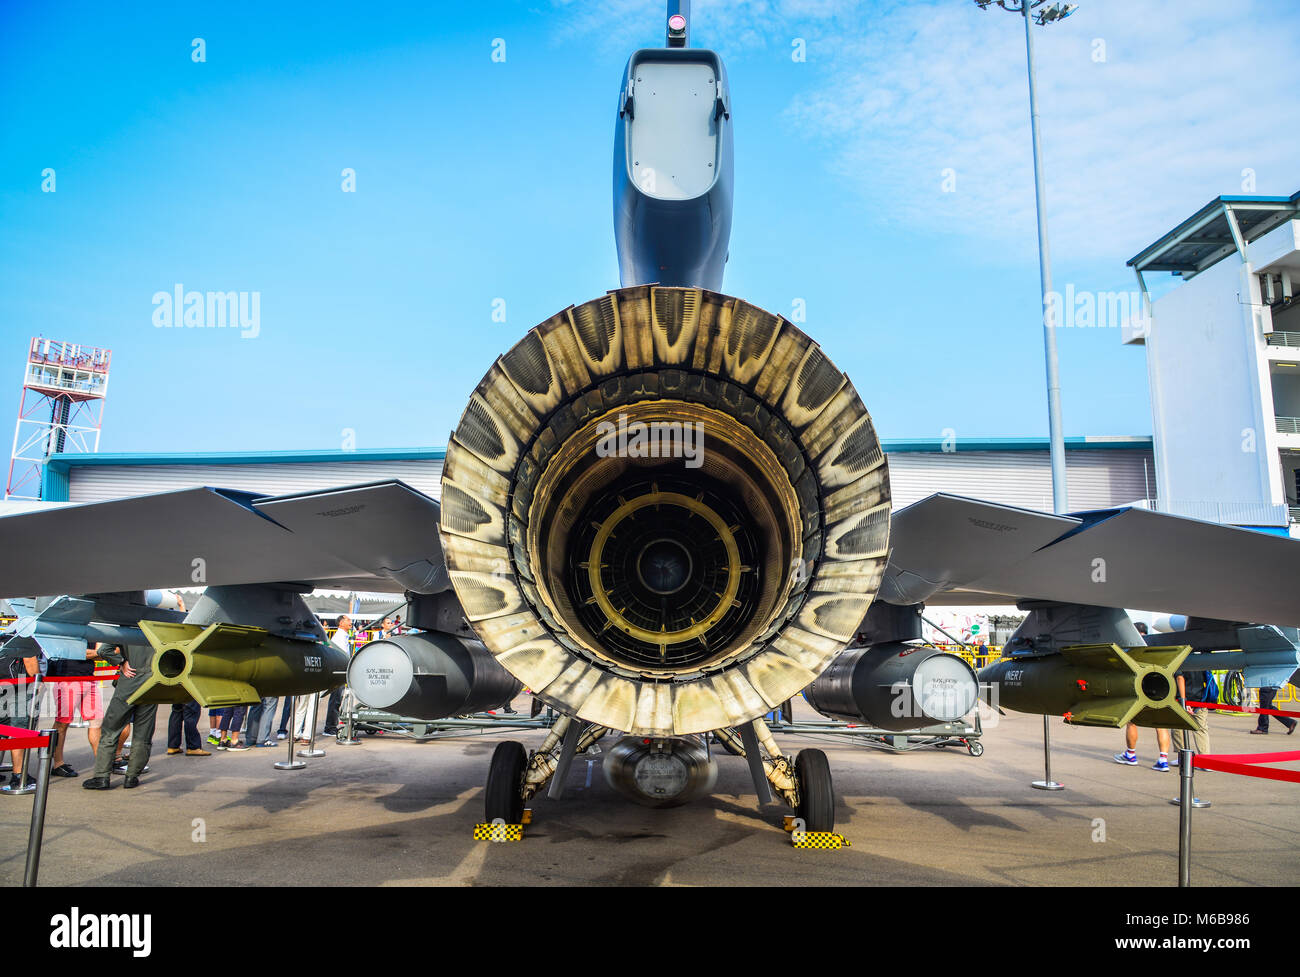 Singapore  - Feb 10, 2018. Engine of Lockheed Martin F-16 Fighting Falcon aircraft belong to the Singapore Air Force sits on display at the 2018 Singa Stock Photo